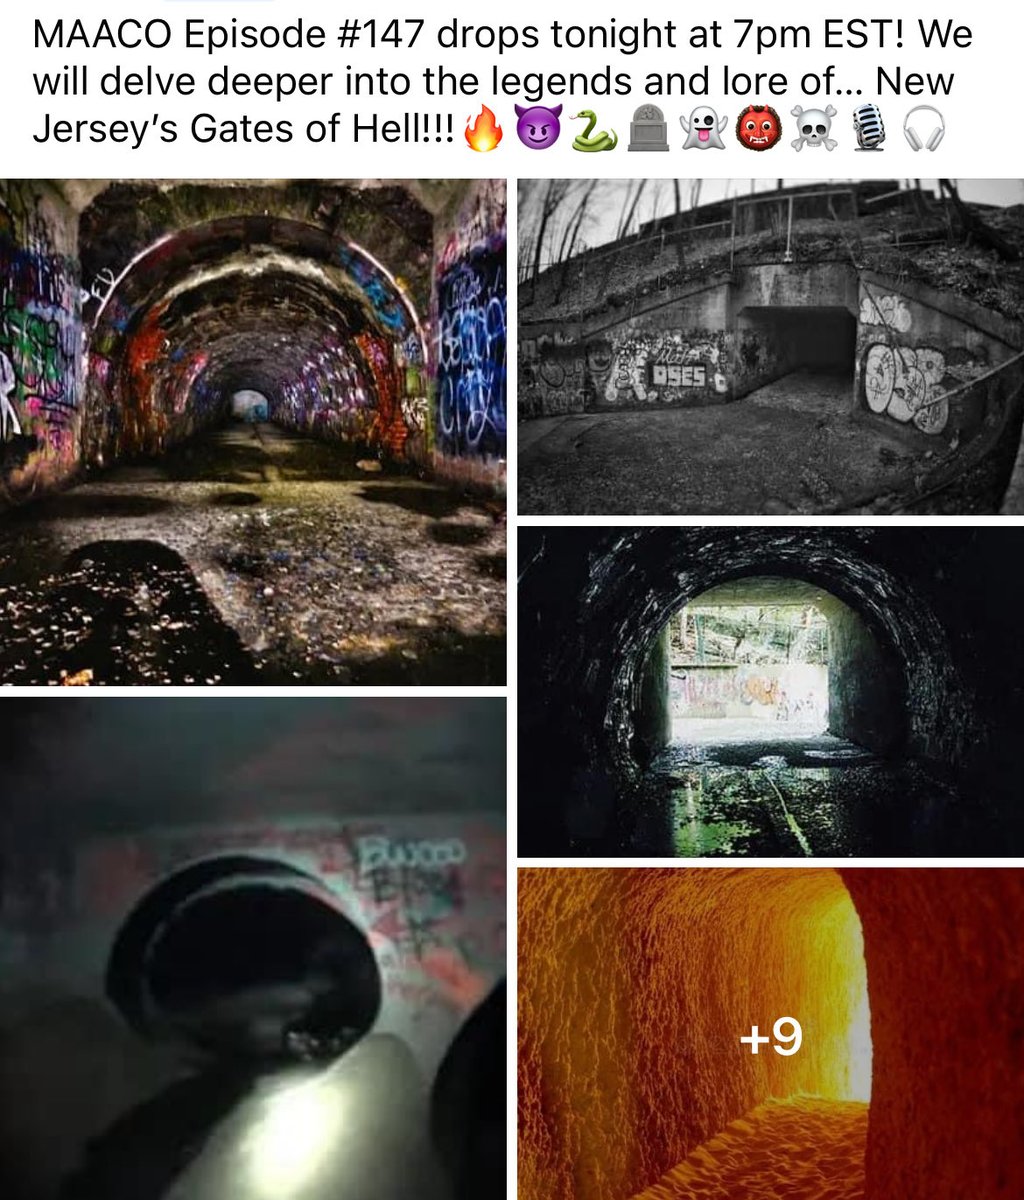 #NewJersey #haunted #gatesofhell #lore #legend #scary #spooky #paranormal #MAACO #creepies #ghosts #demonic #unexplained #dark #unusual #paranormalpodcast